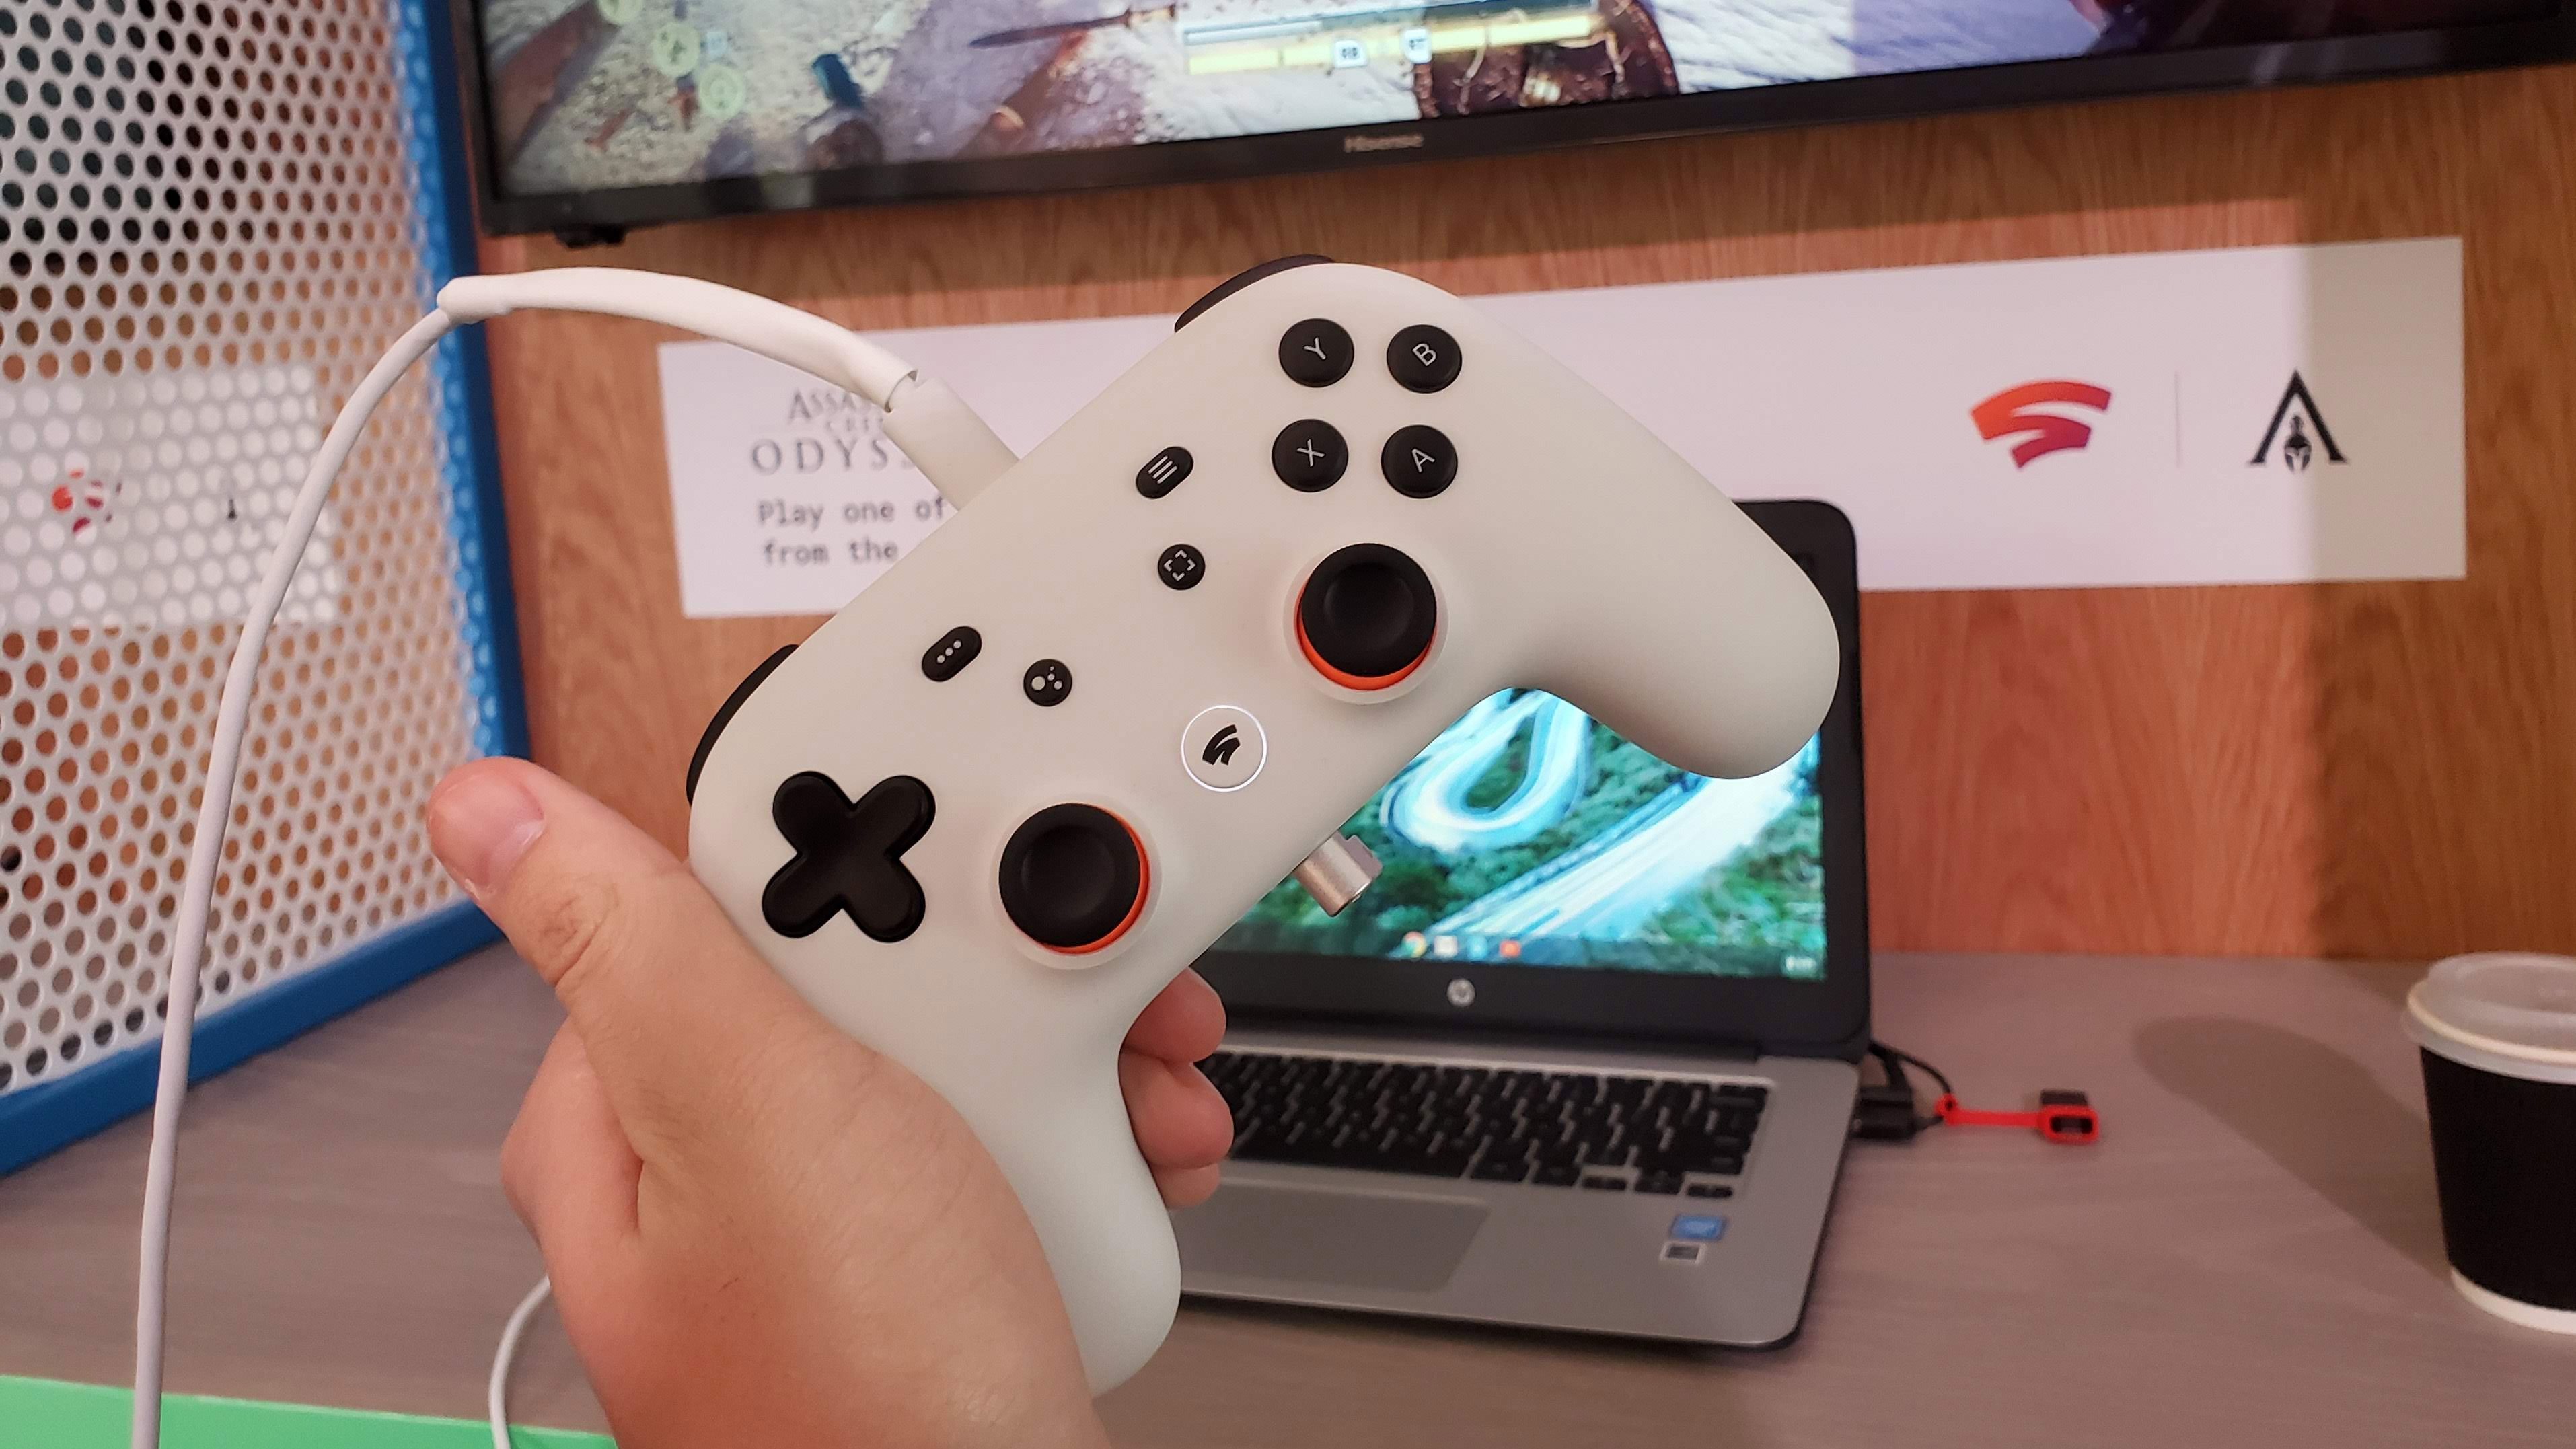 Google Stadia is coming November 19th: details, price, and the